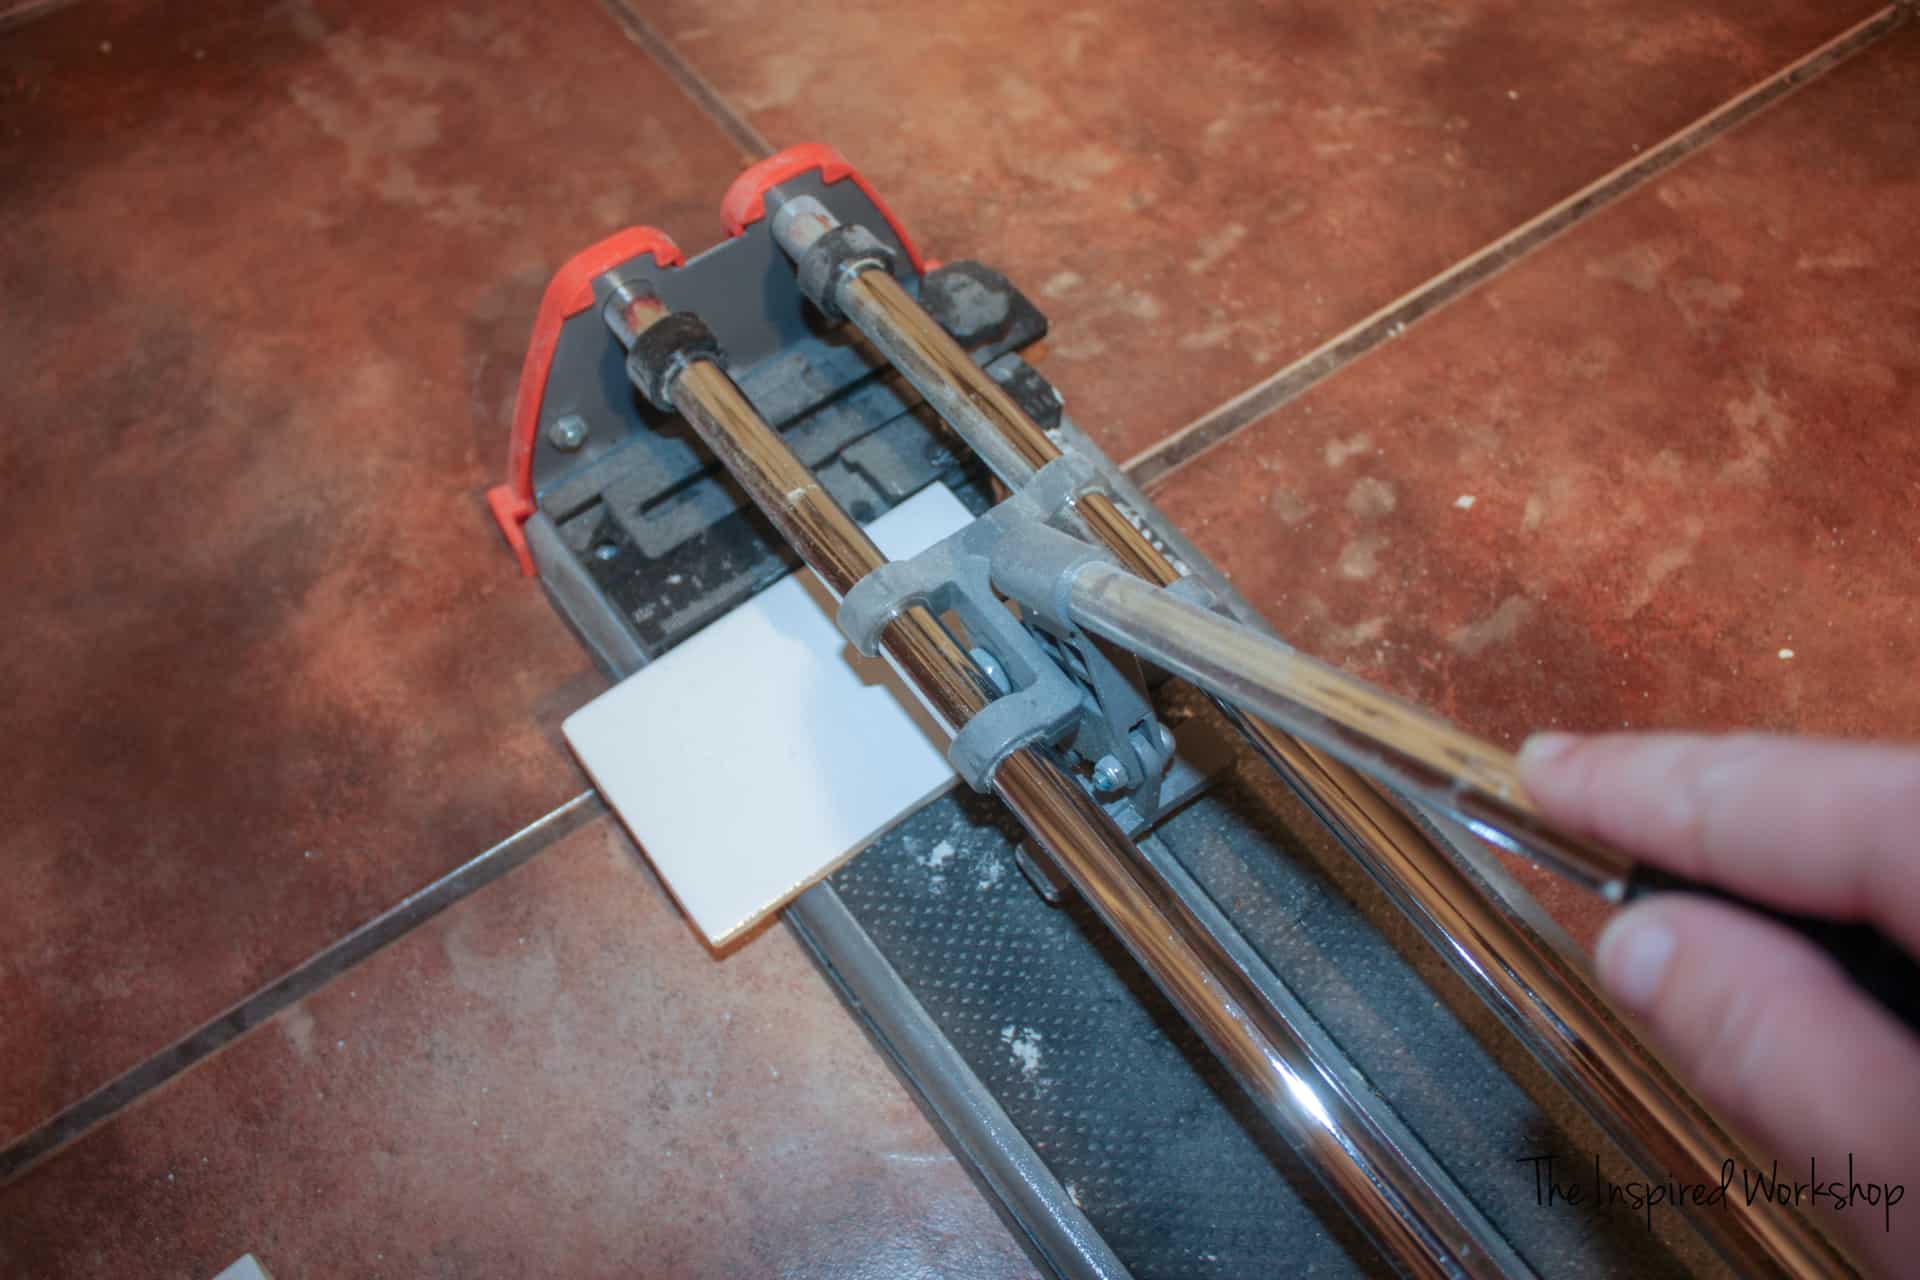 Using a tile cutter to make cuts in subway tile